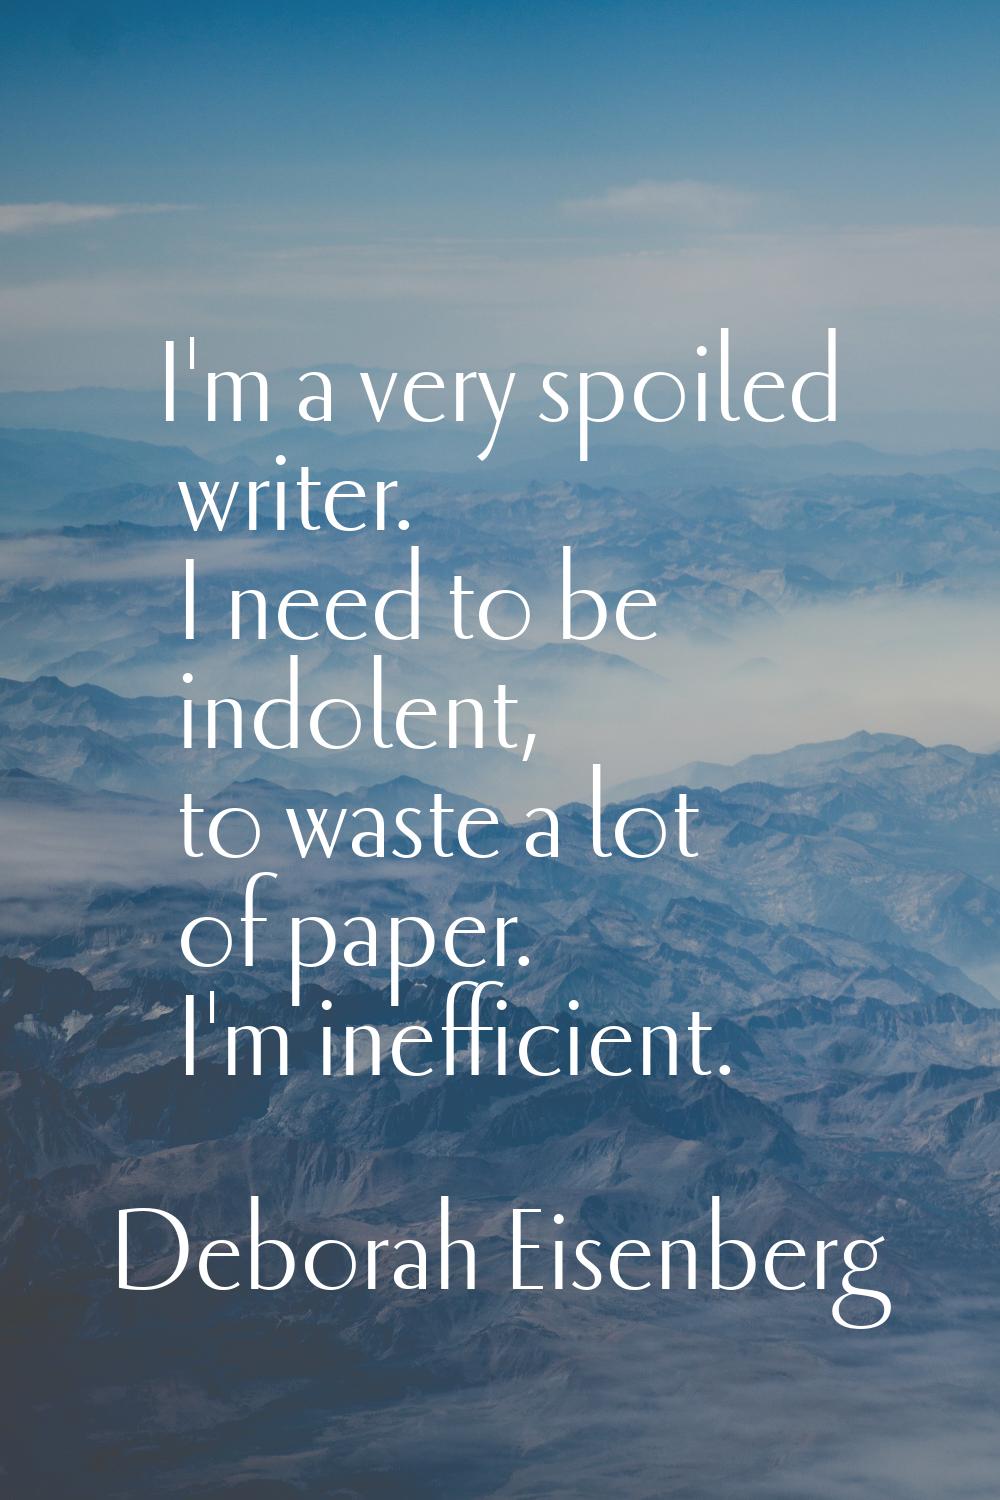 I'm a very spoiled writer. I need to be indolent, to waste a lot of paper. I'm inefficient.